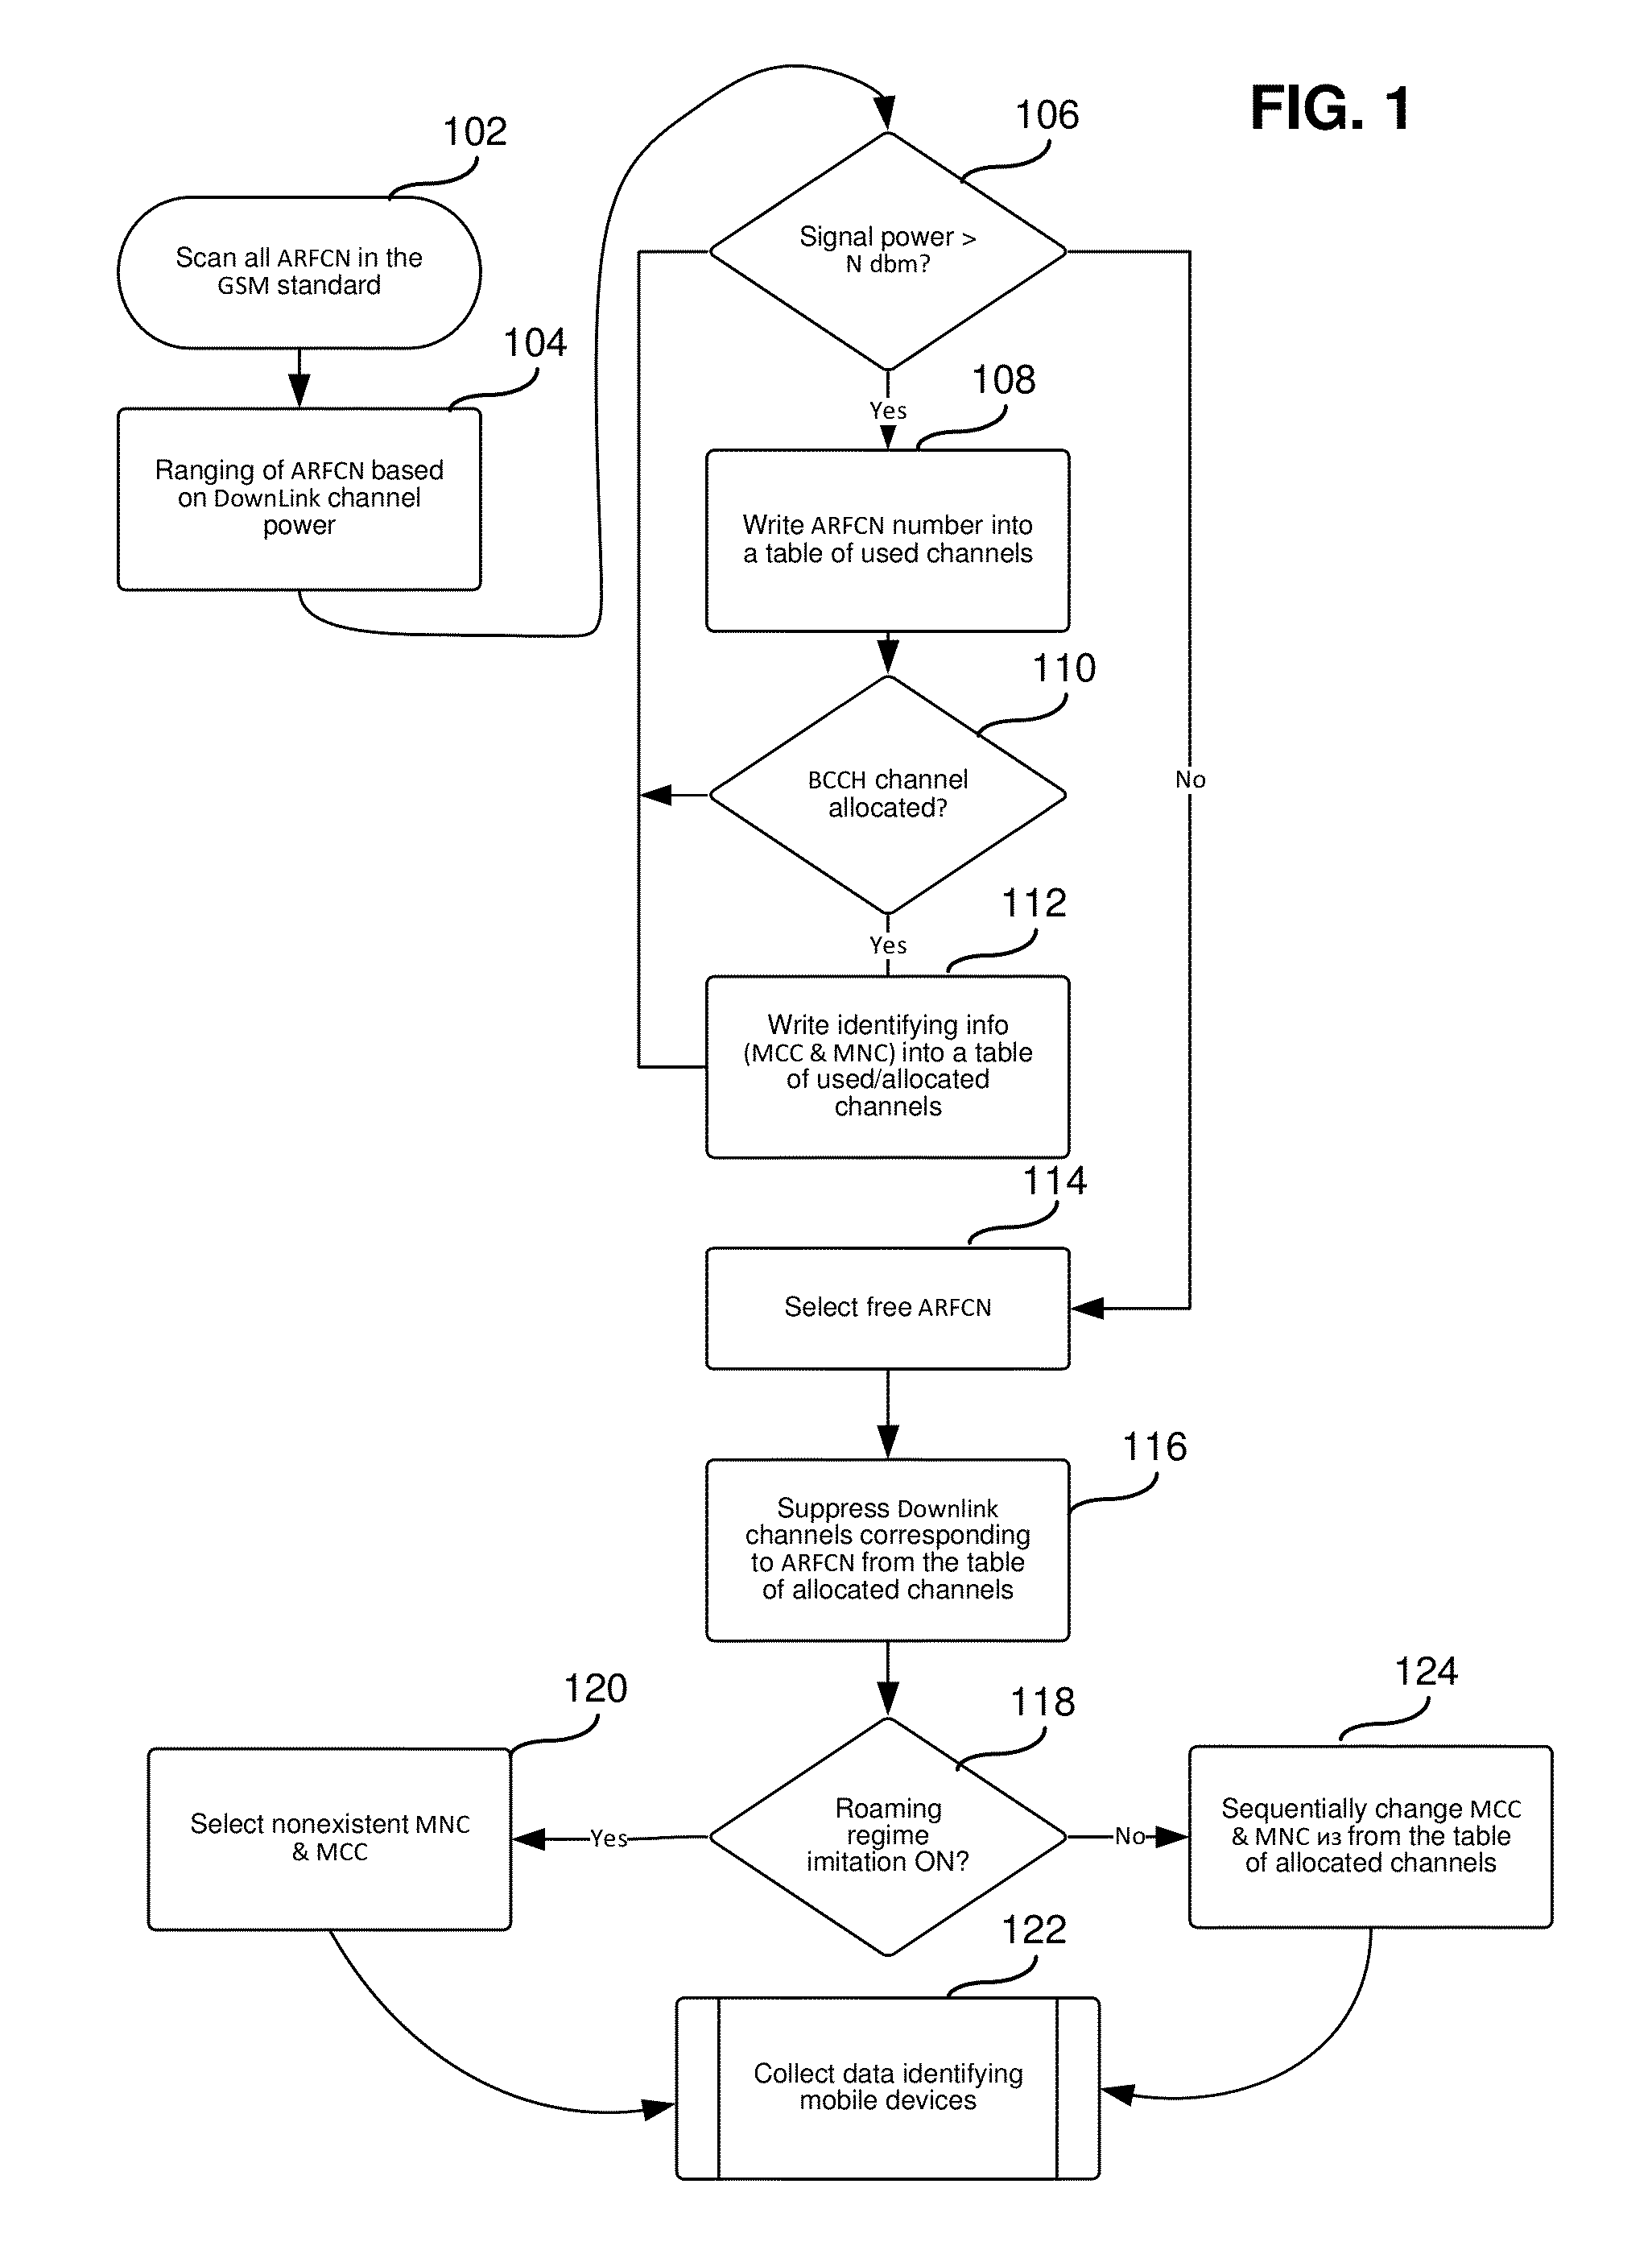 Method of using aircraft for providing mobile network connection and locating subscribers in specified areas